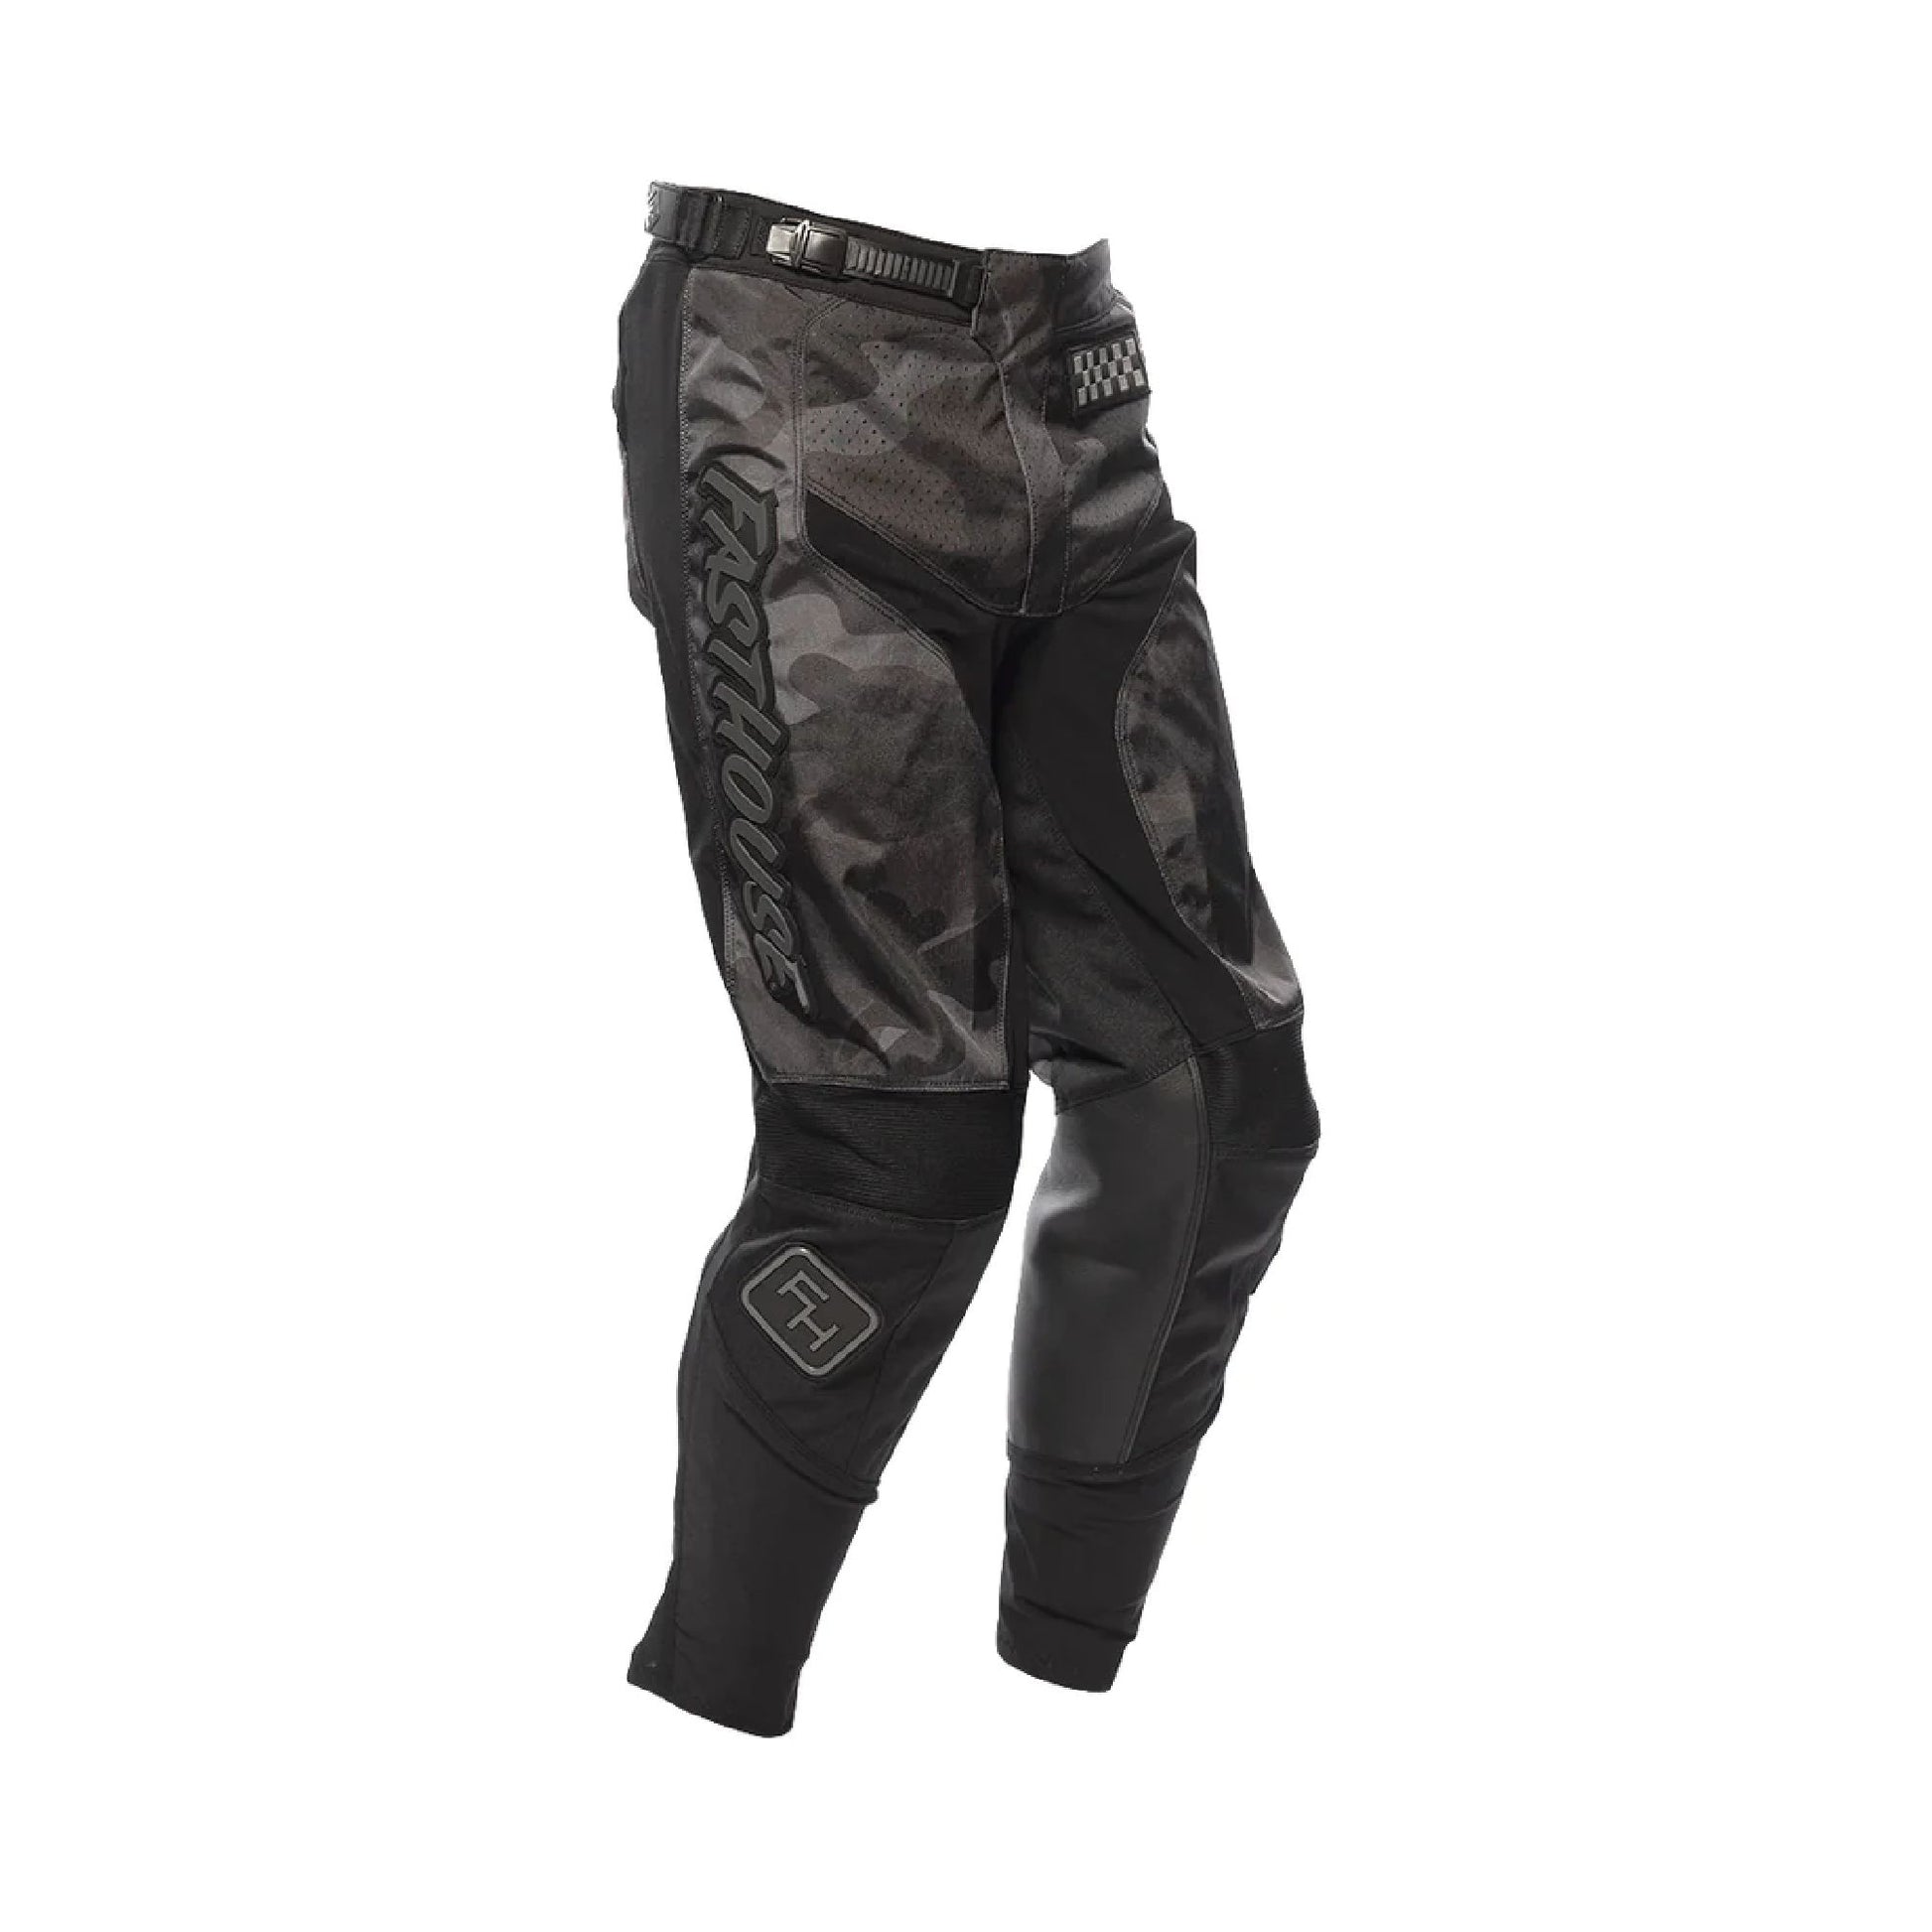 Fasthouse Youth Grindhouse Pants Camo/Black Bike Pants